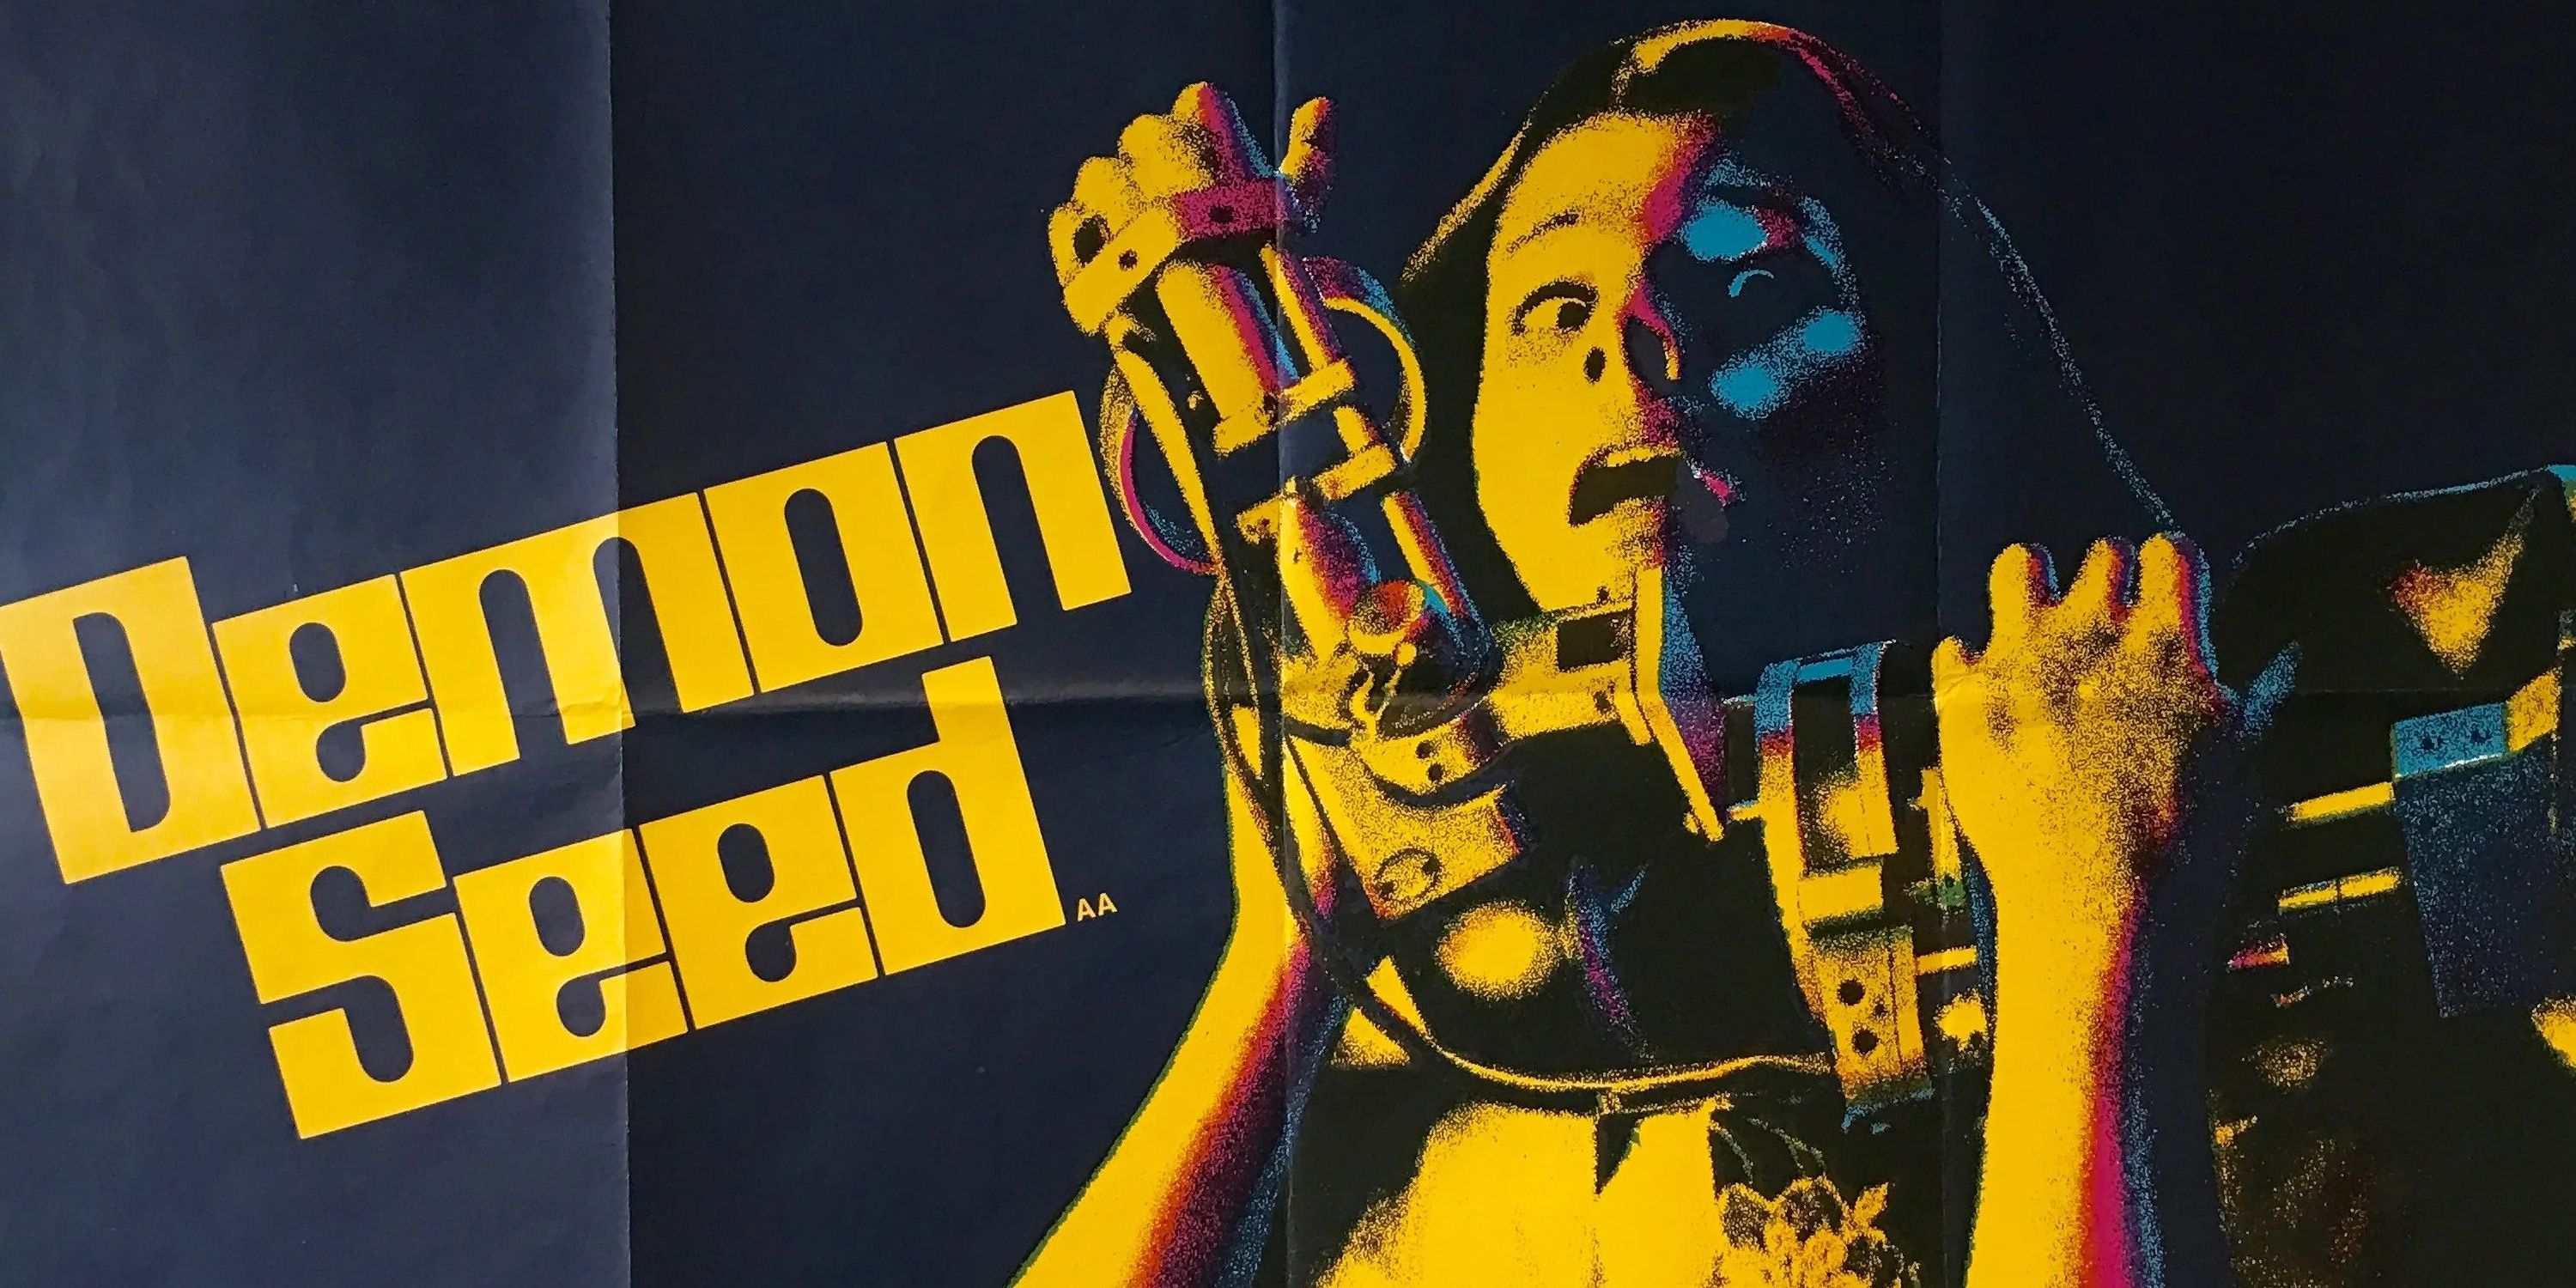 demon-seed-poster Cropped